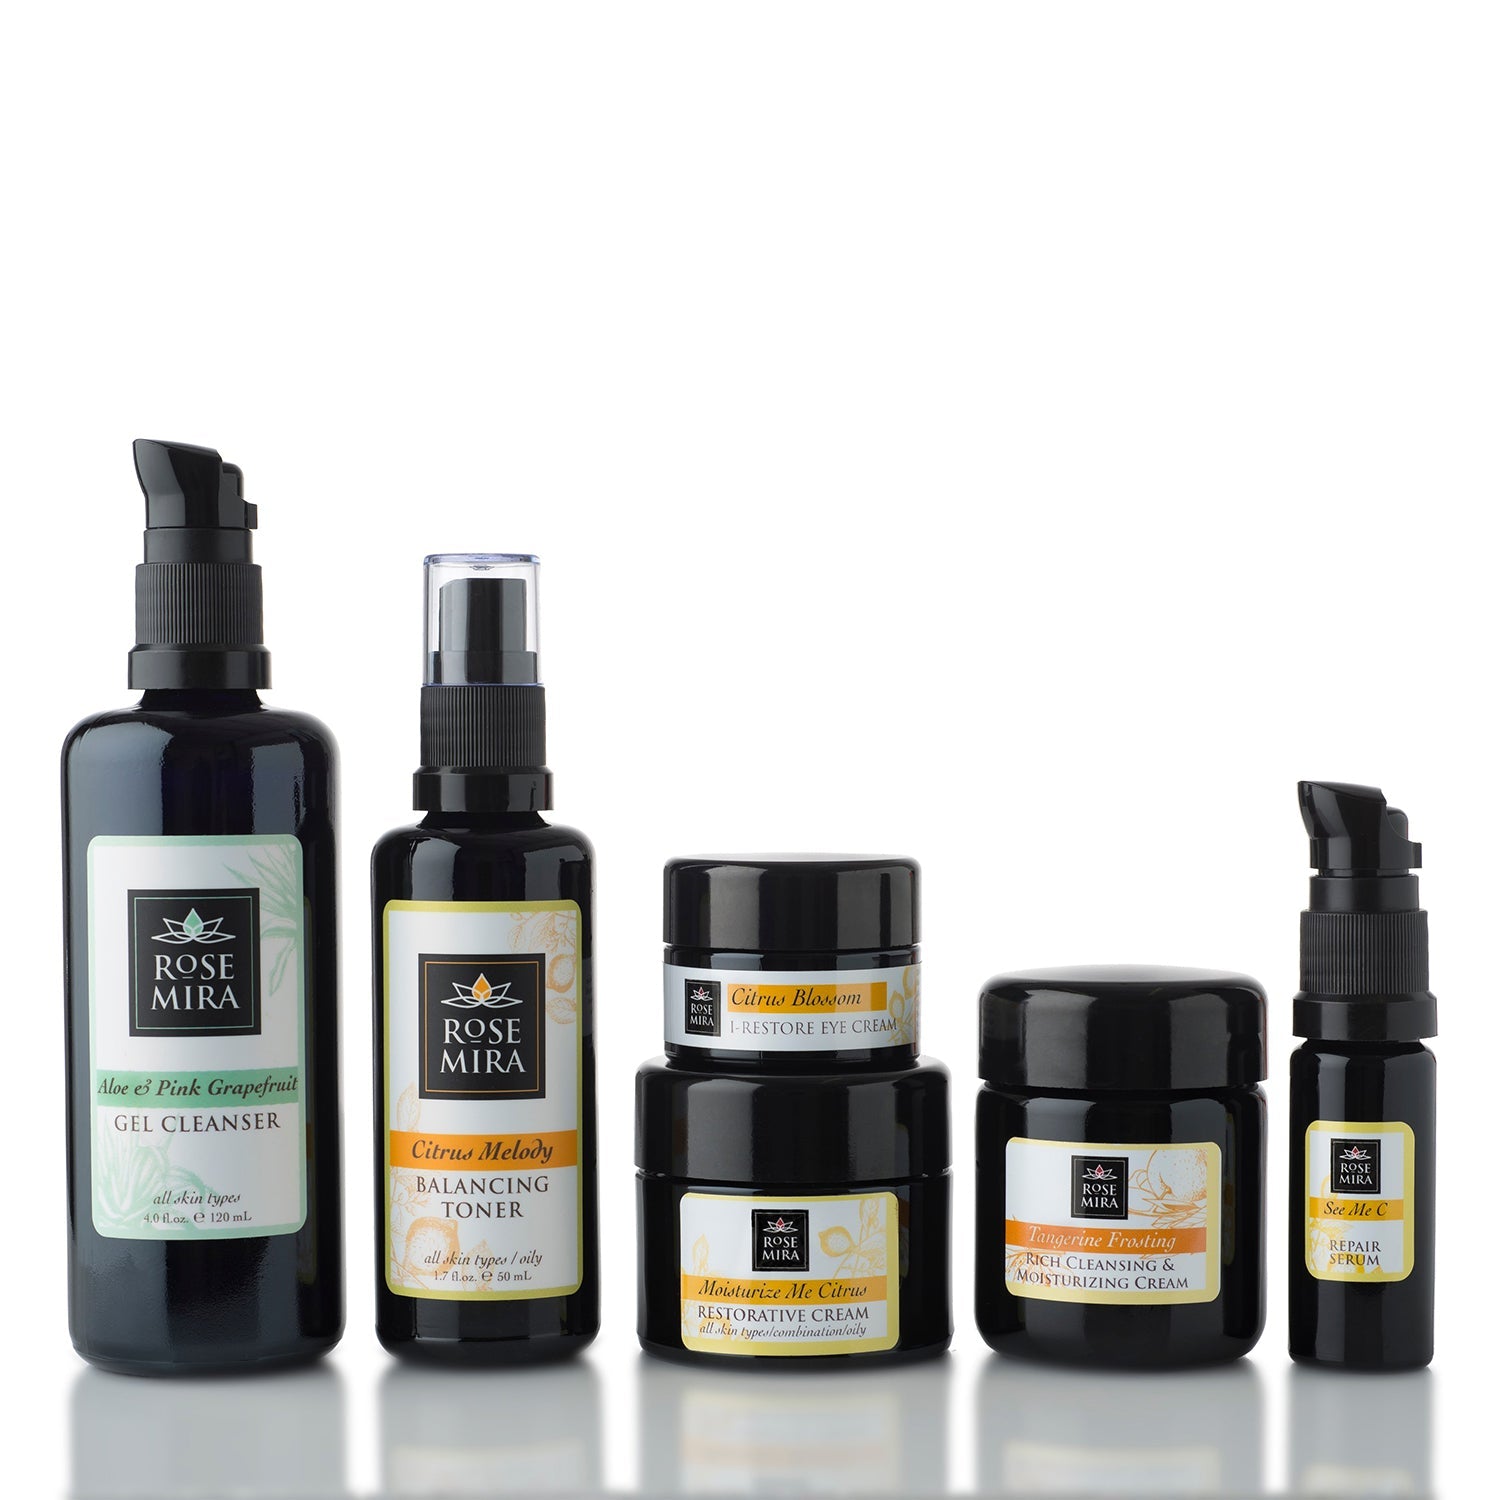 Retail Sized Product Kit / Citrus Melody Essentials Collection (6 items) - Guy Christopher